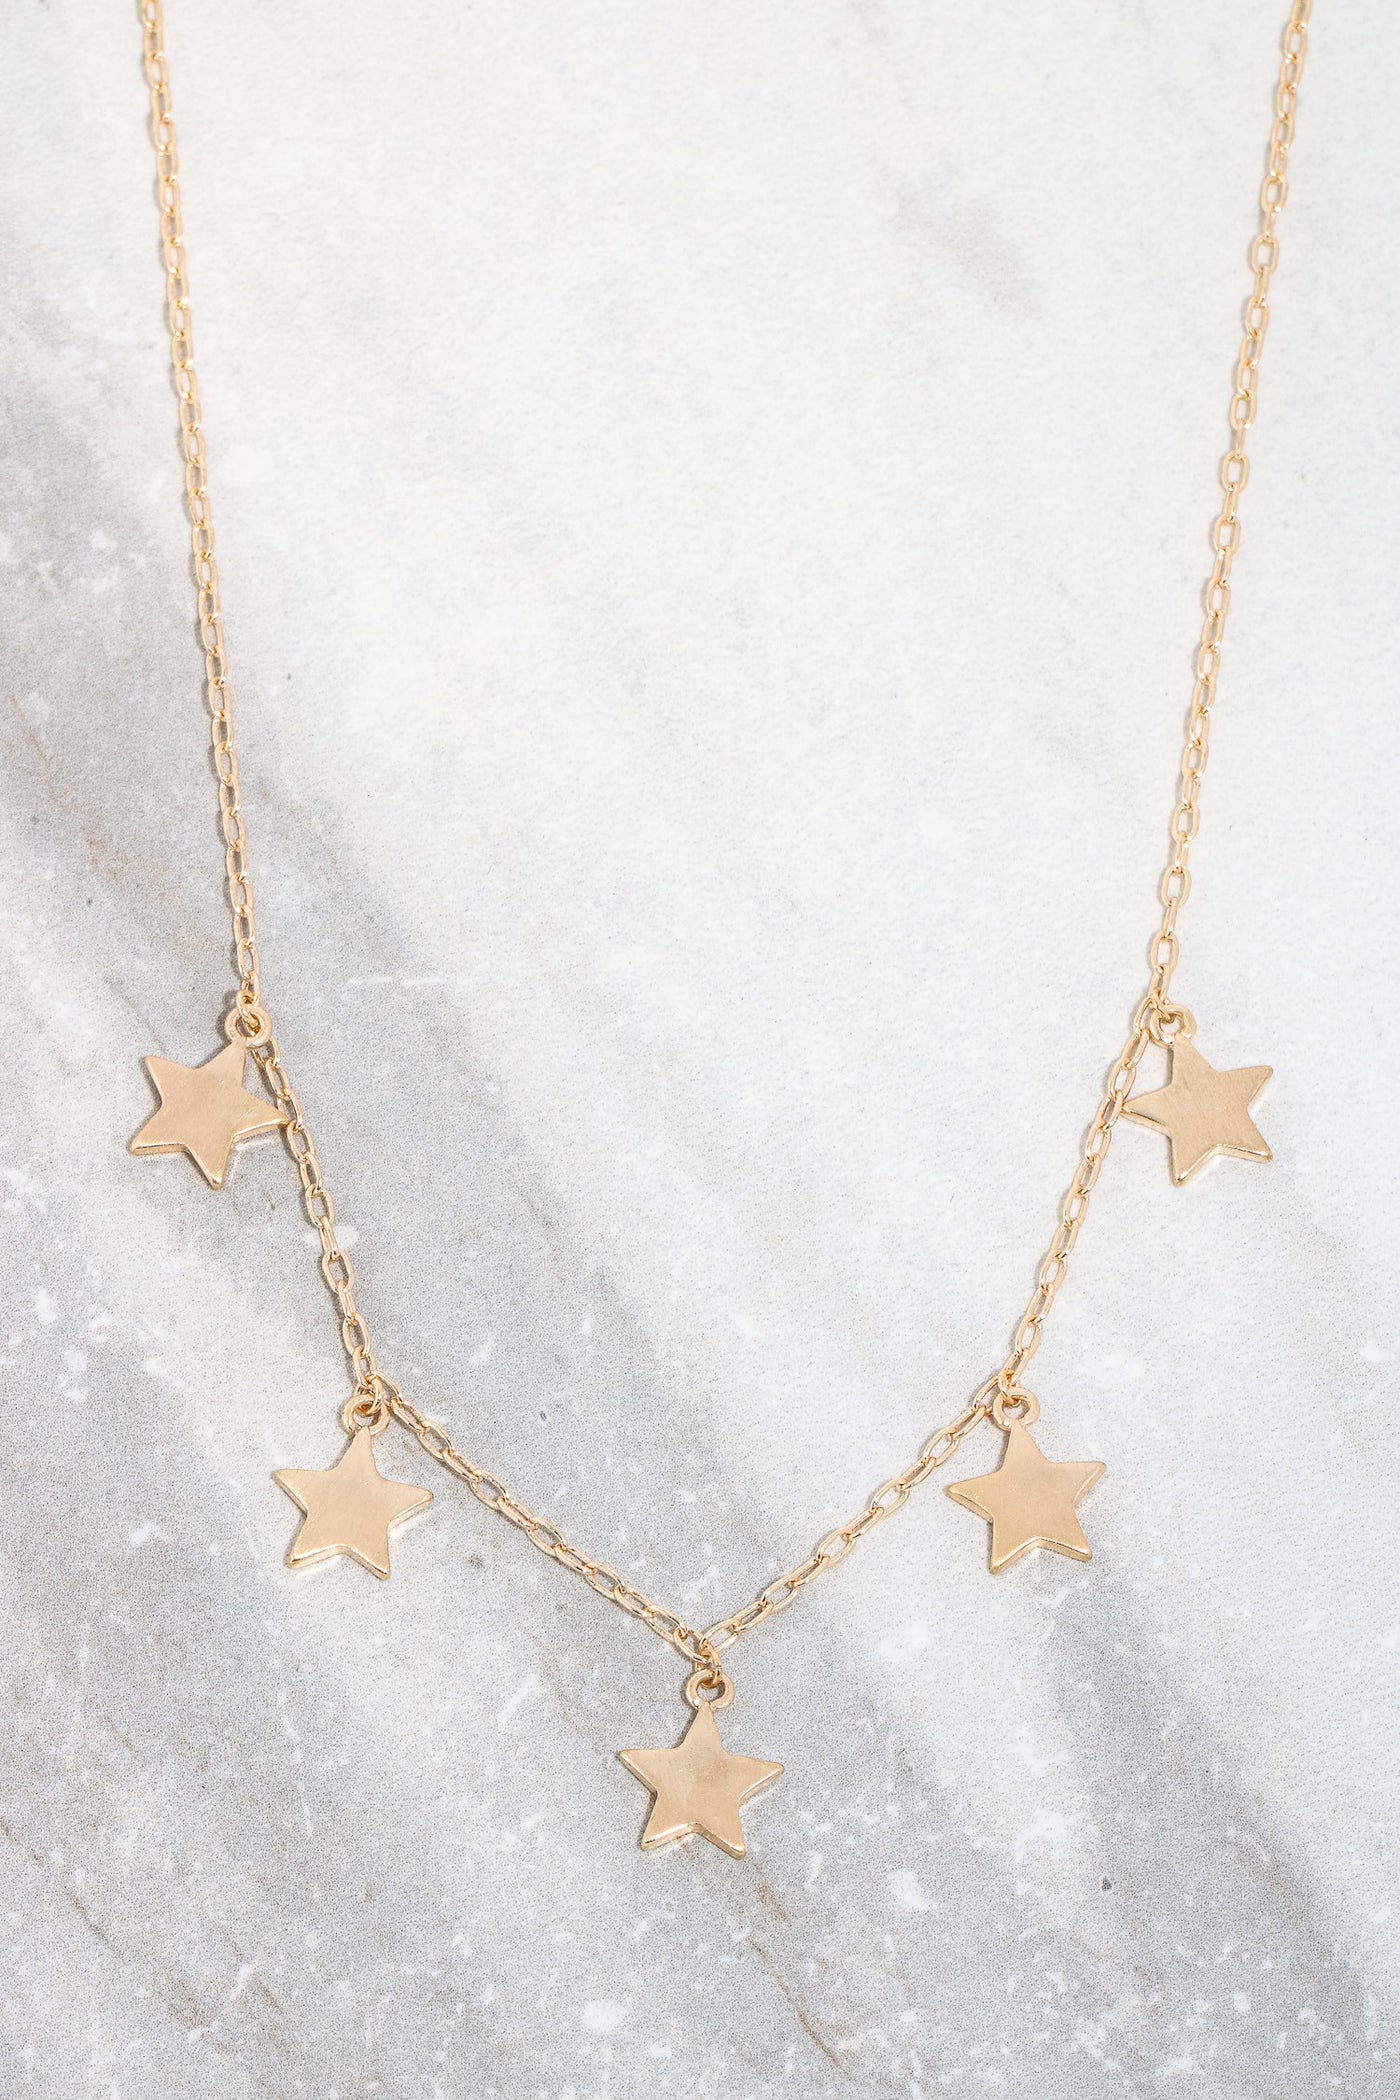 5 Metallic Star Charm Necklace - Multiple Colors